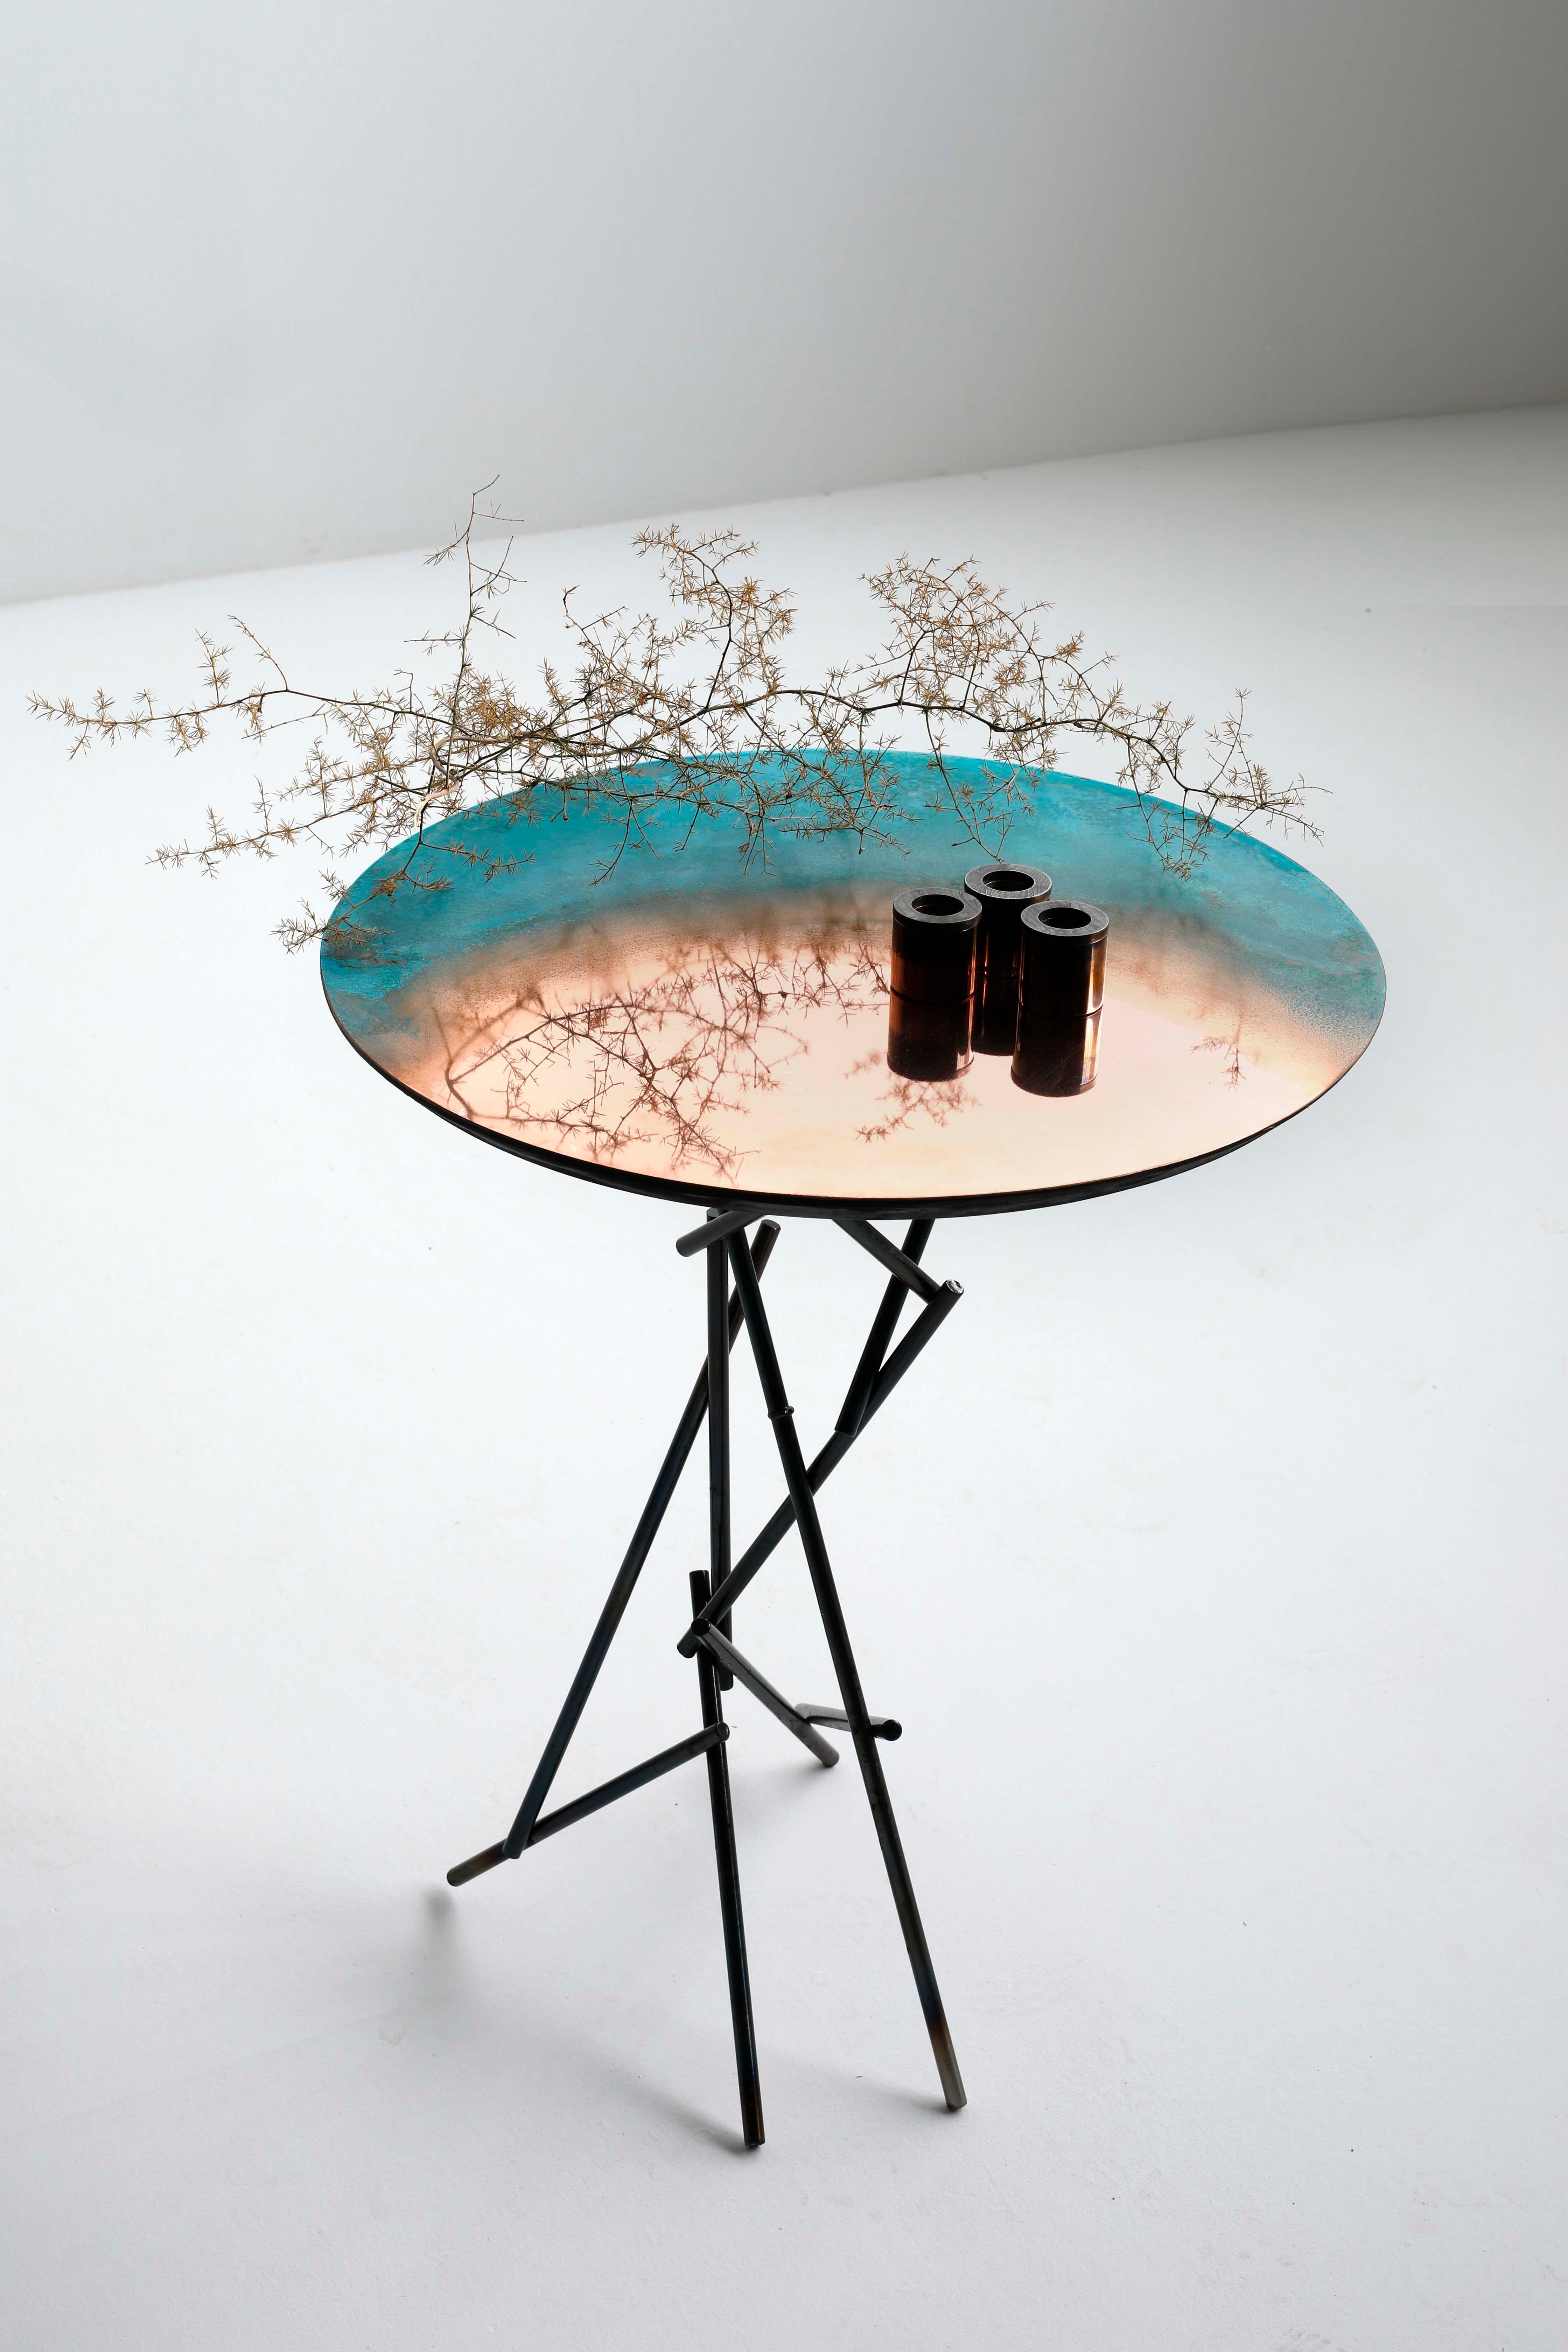 Copper hand-sculpted side table by Samuel Costantini
Entirely handmade by the artist, each one is unique.
Measures: diameter 500mm, height 550 mm.
diameter 19.685, height 21.653 inches
Cylindrical table with oxidized copper top and black